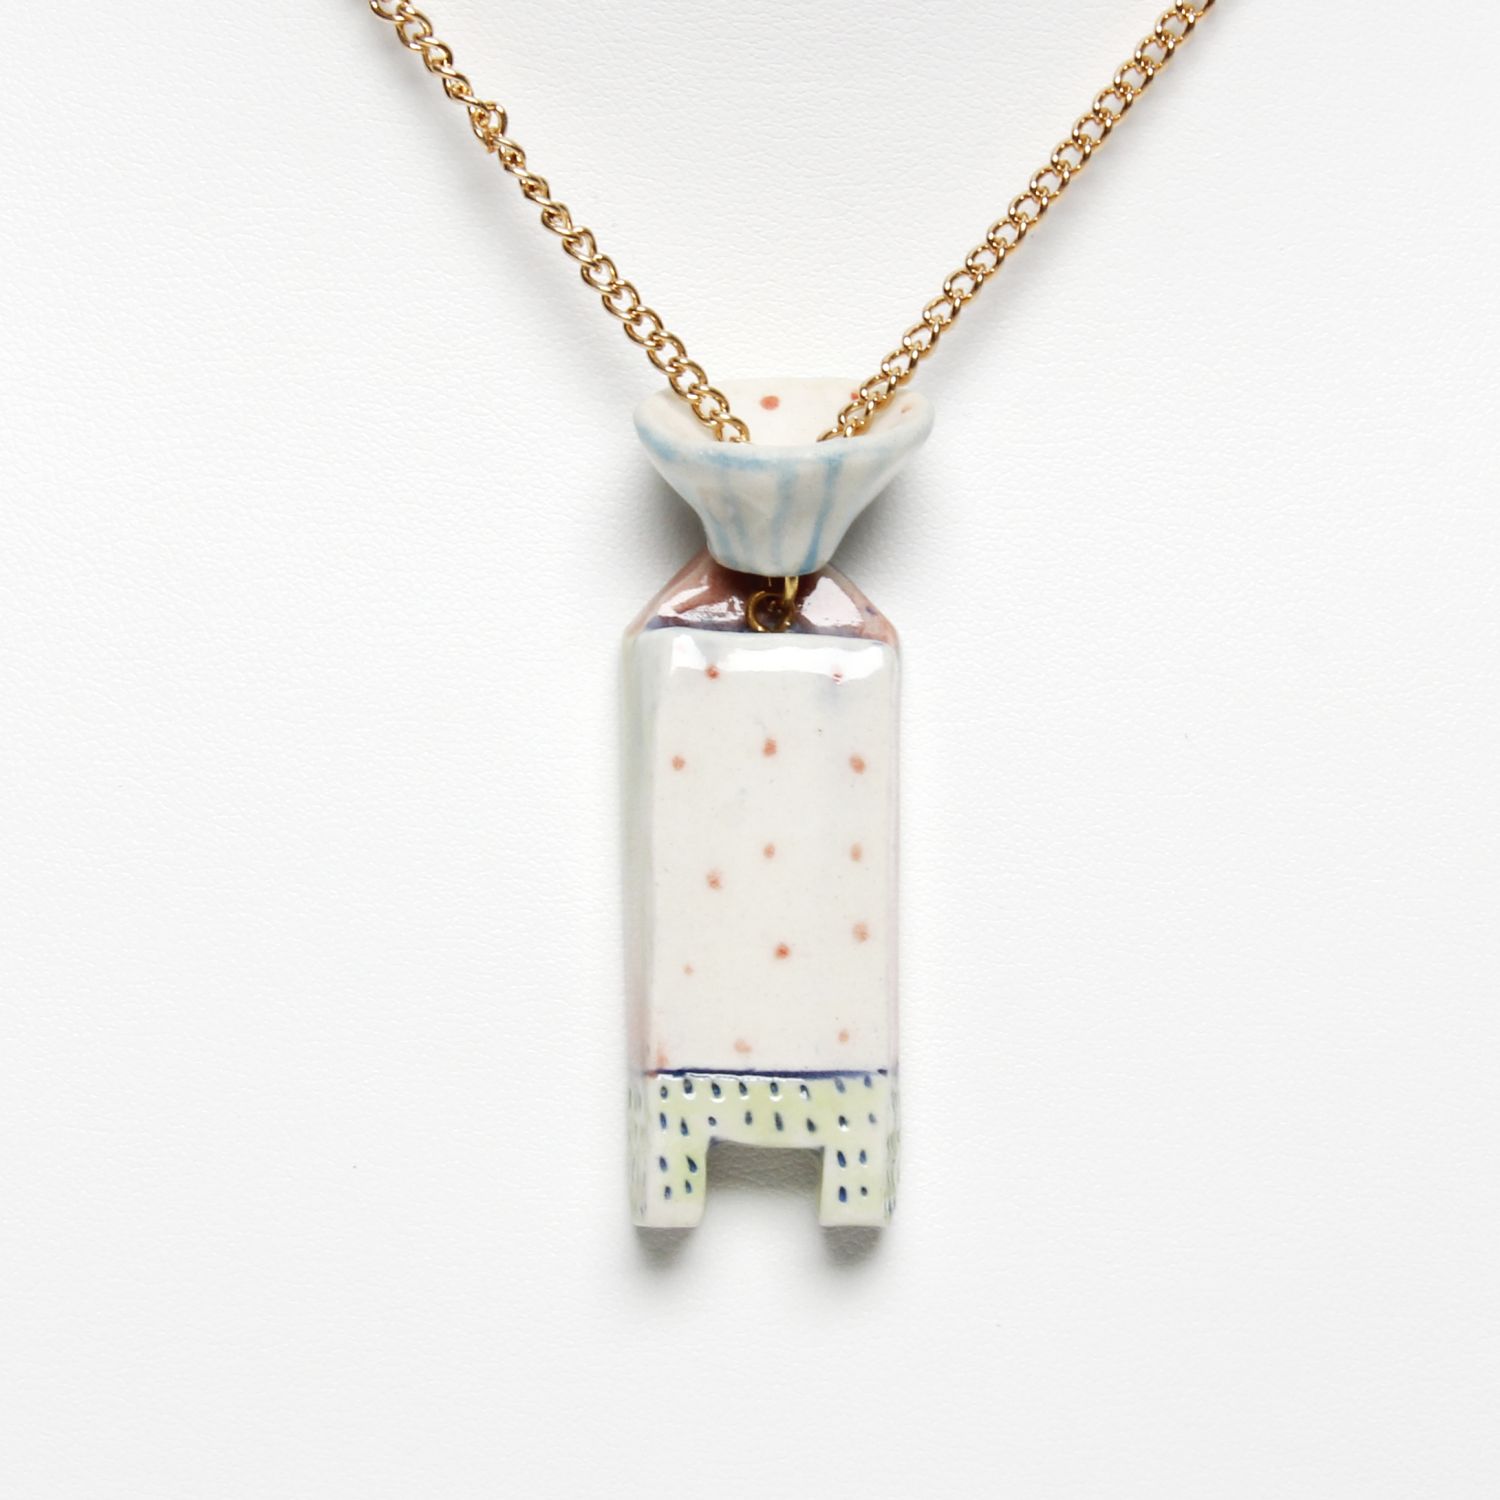 Maria Moldovan: House Pendant Necklace Product Image 2 of 3